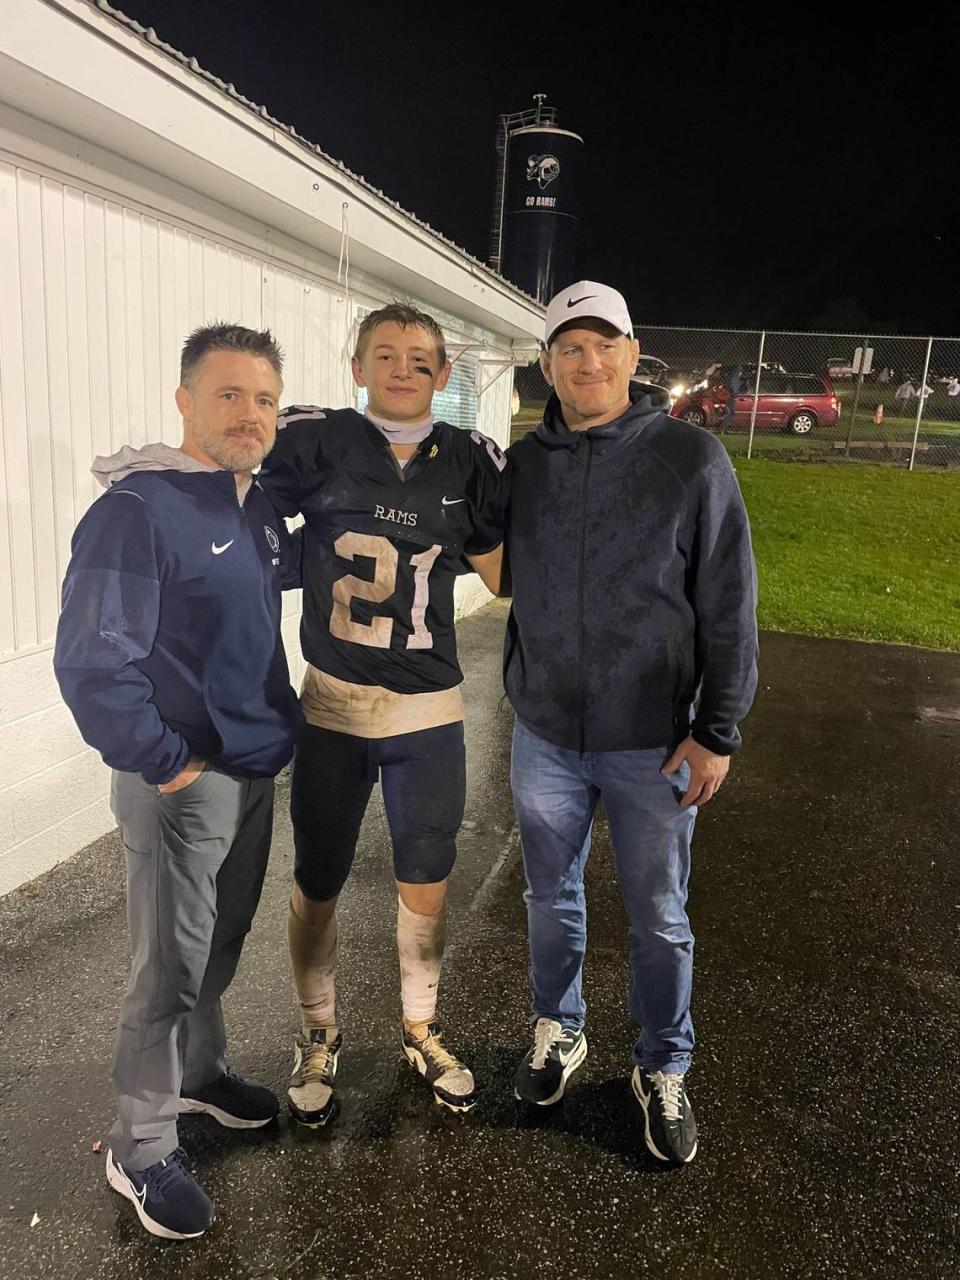 Penn State coaches Cael (right) and Cody (left) Sanderson attended one of Ty Watson’s (center) football games to support him. He said that support helped make a decision to join the Nittany Lions.